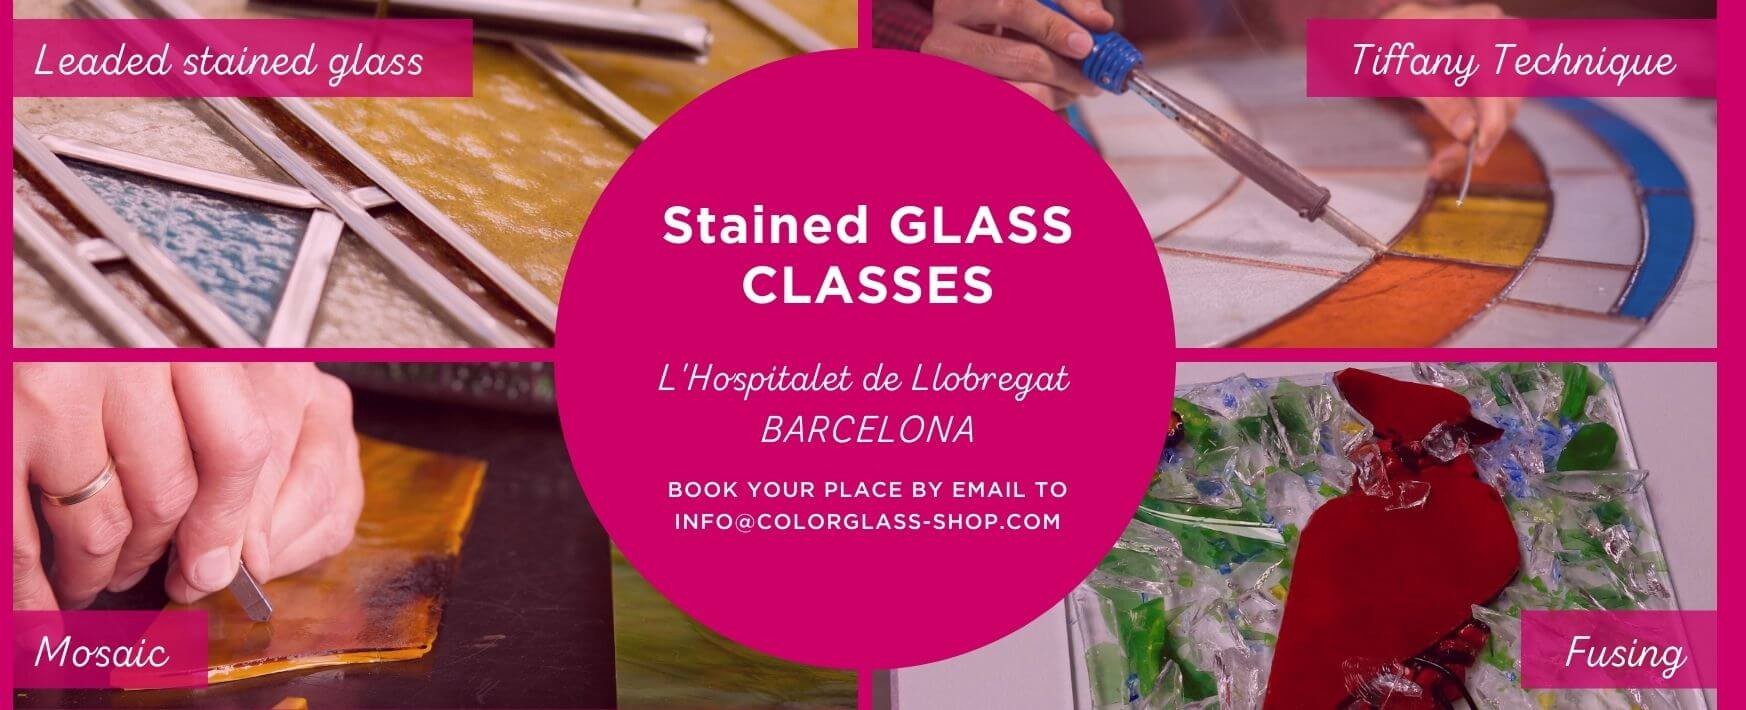 Stained Glass Classes Barcelona